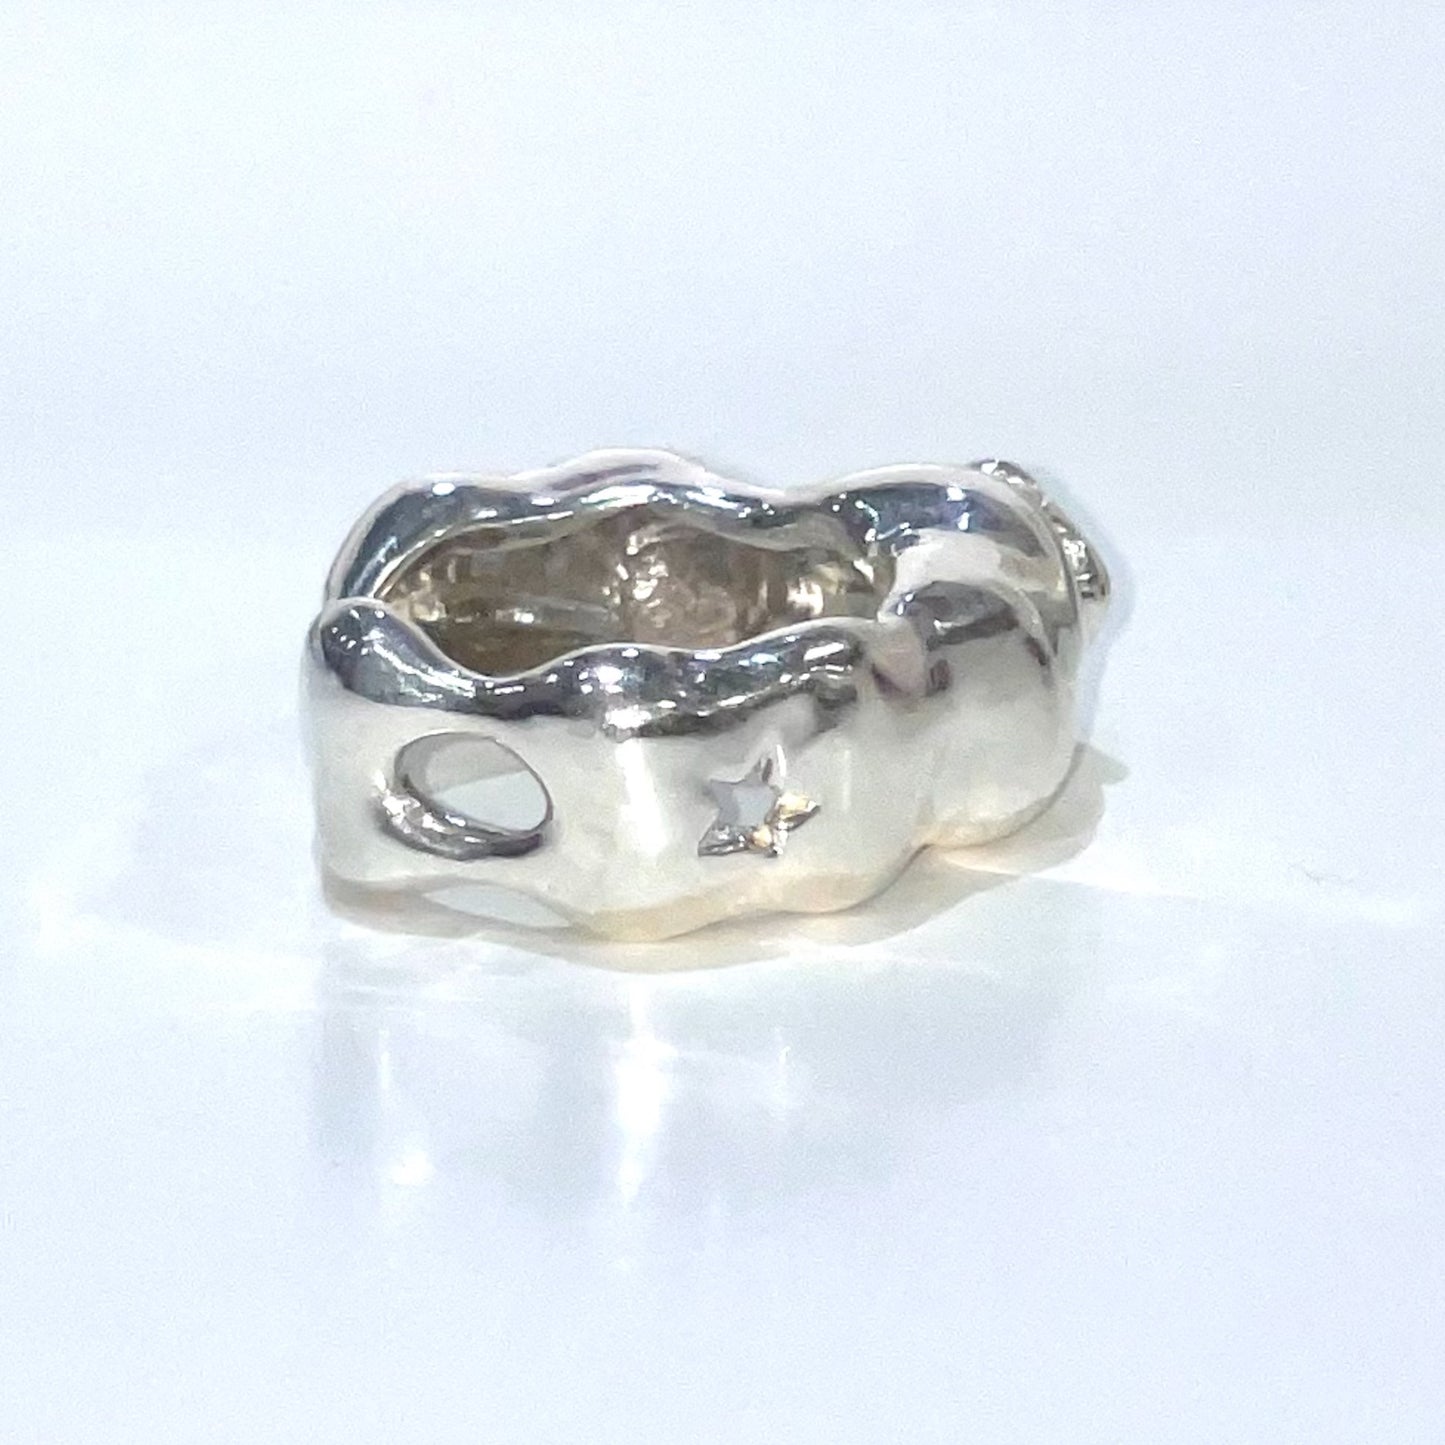 SHEEP RING / sterling silver / シープリング